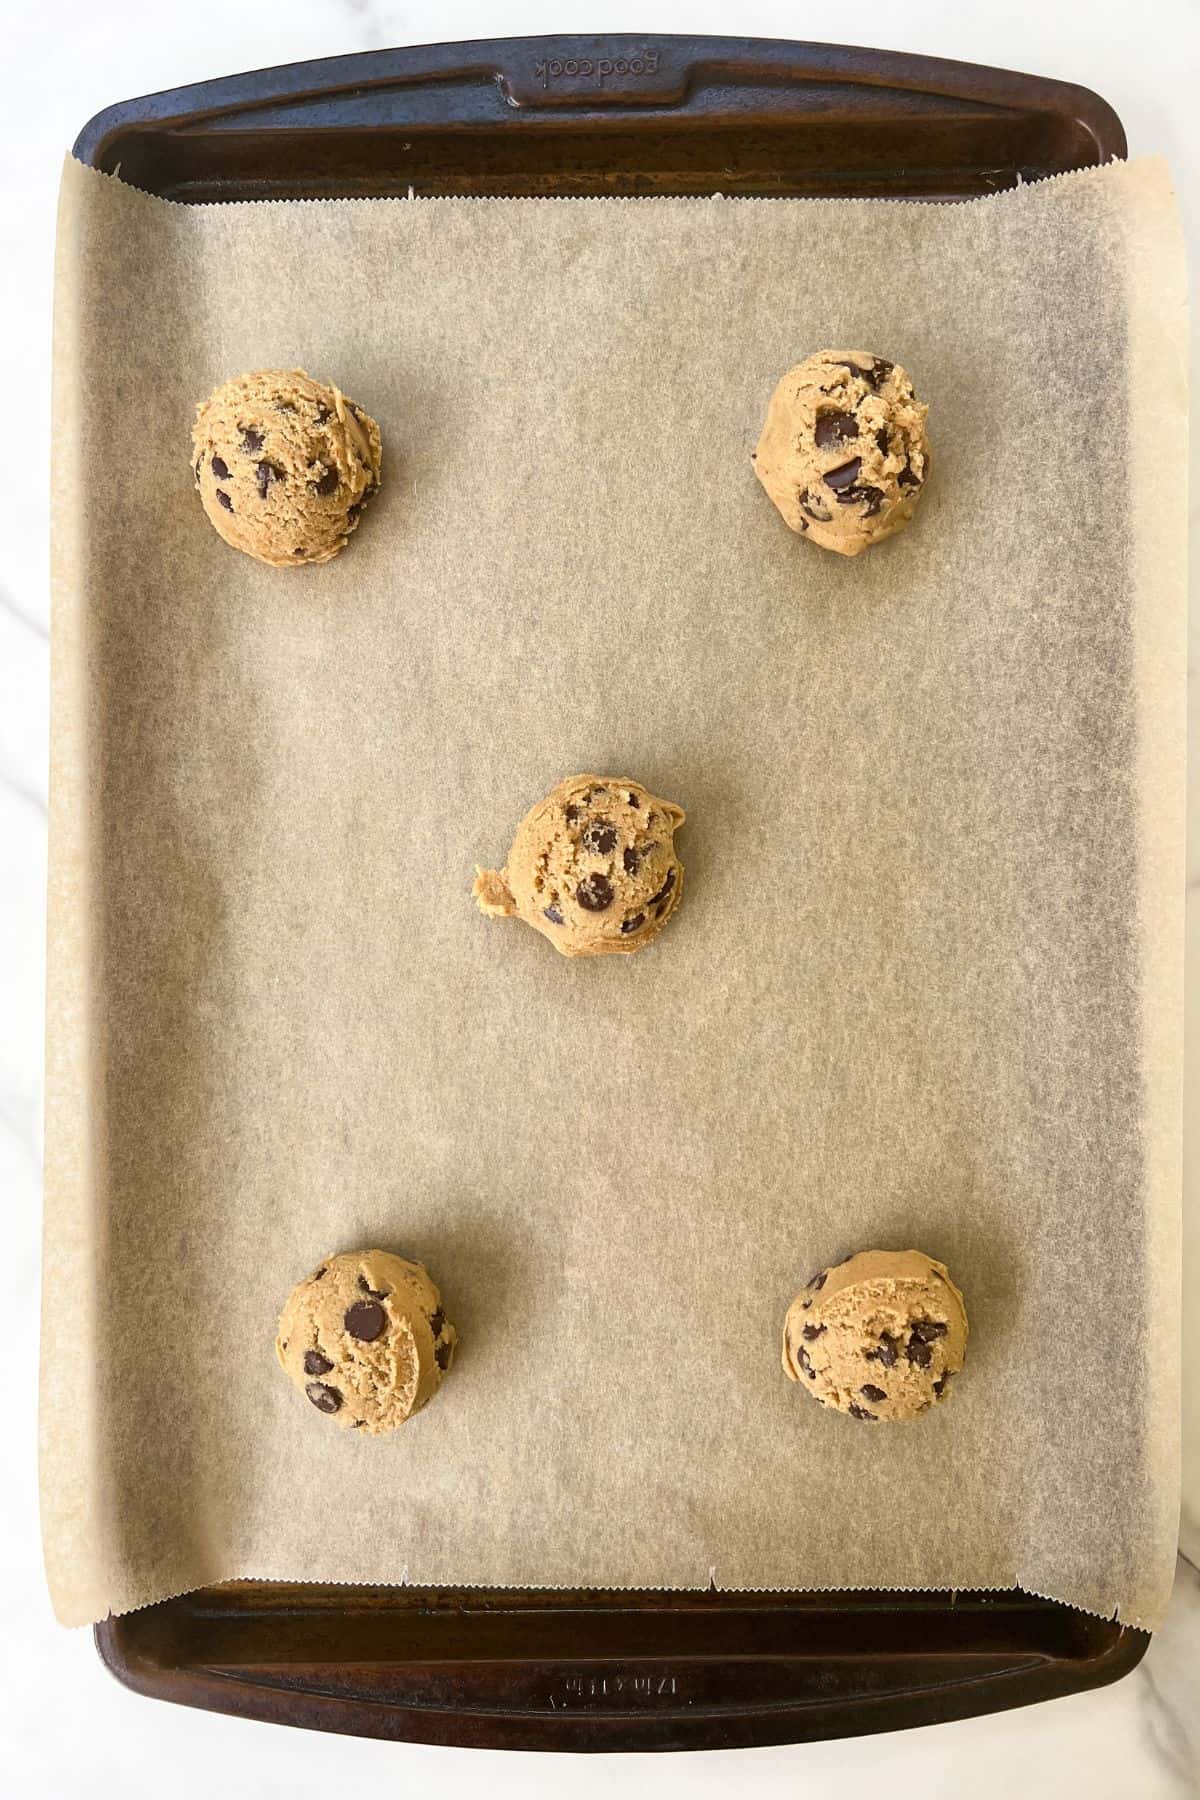 Scoop the cookie dough into even sized balls and place spread out on a baking sheet lined with parchment paper.